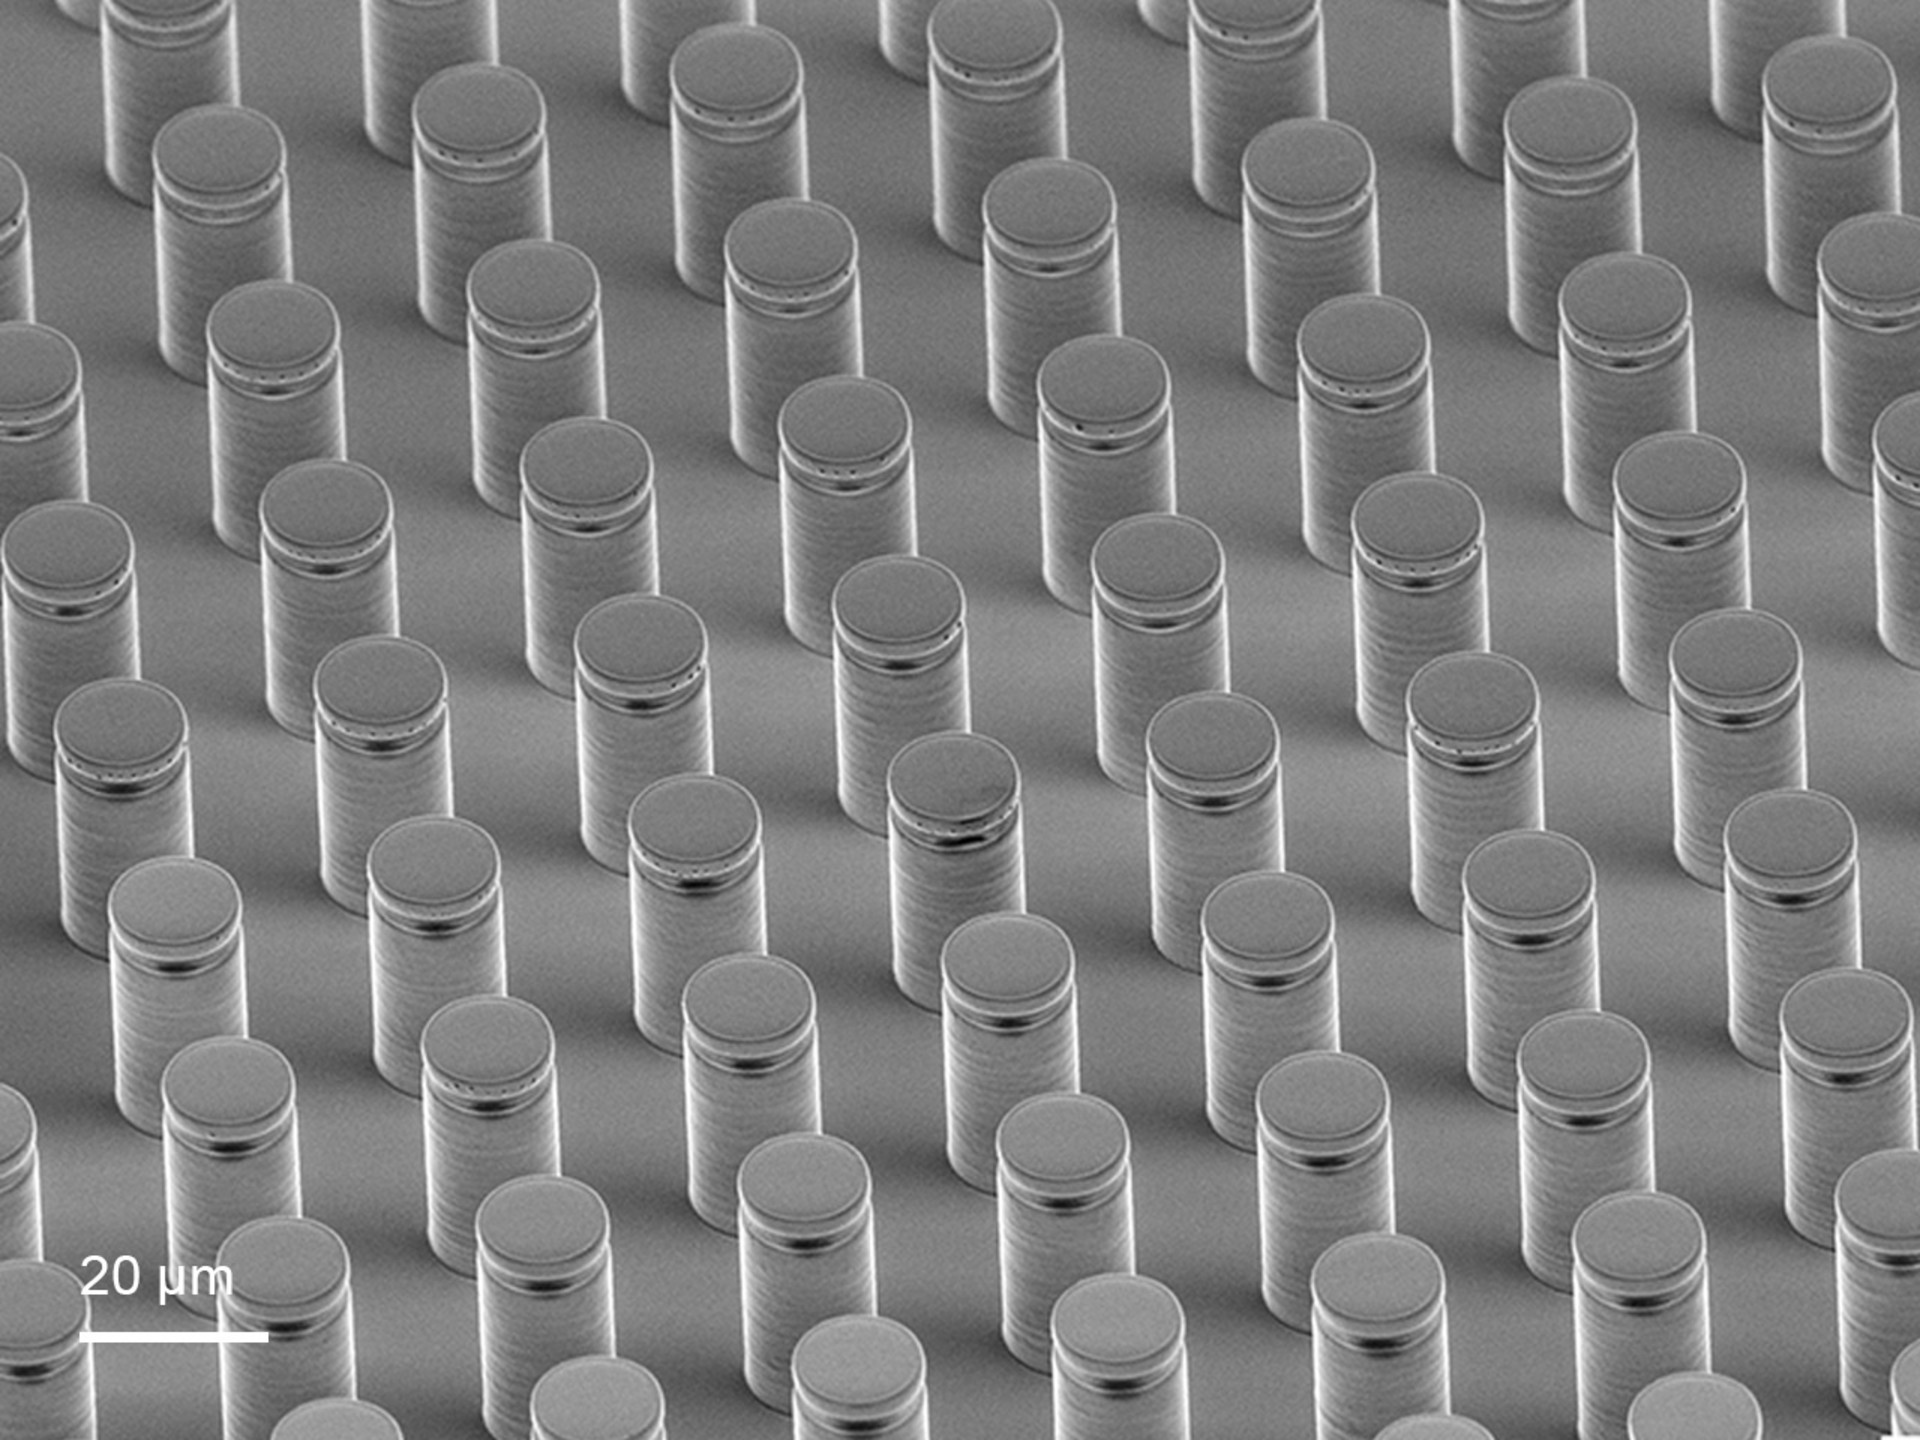 Array of bioinspired adhesive microstructures 